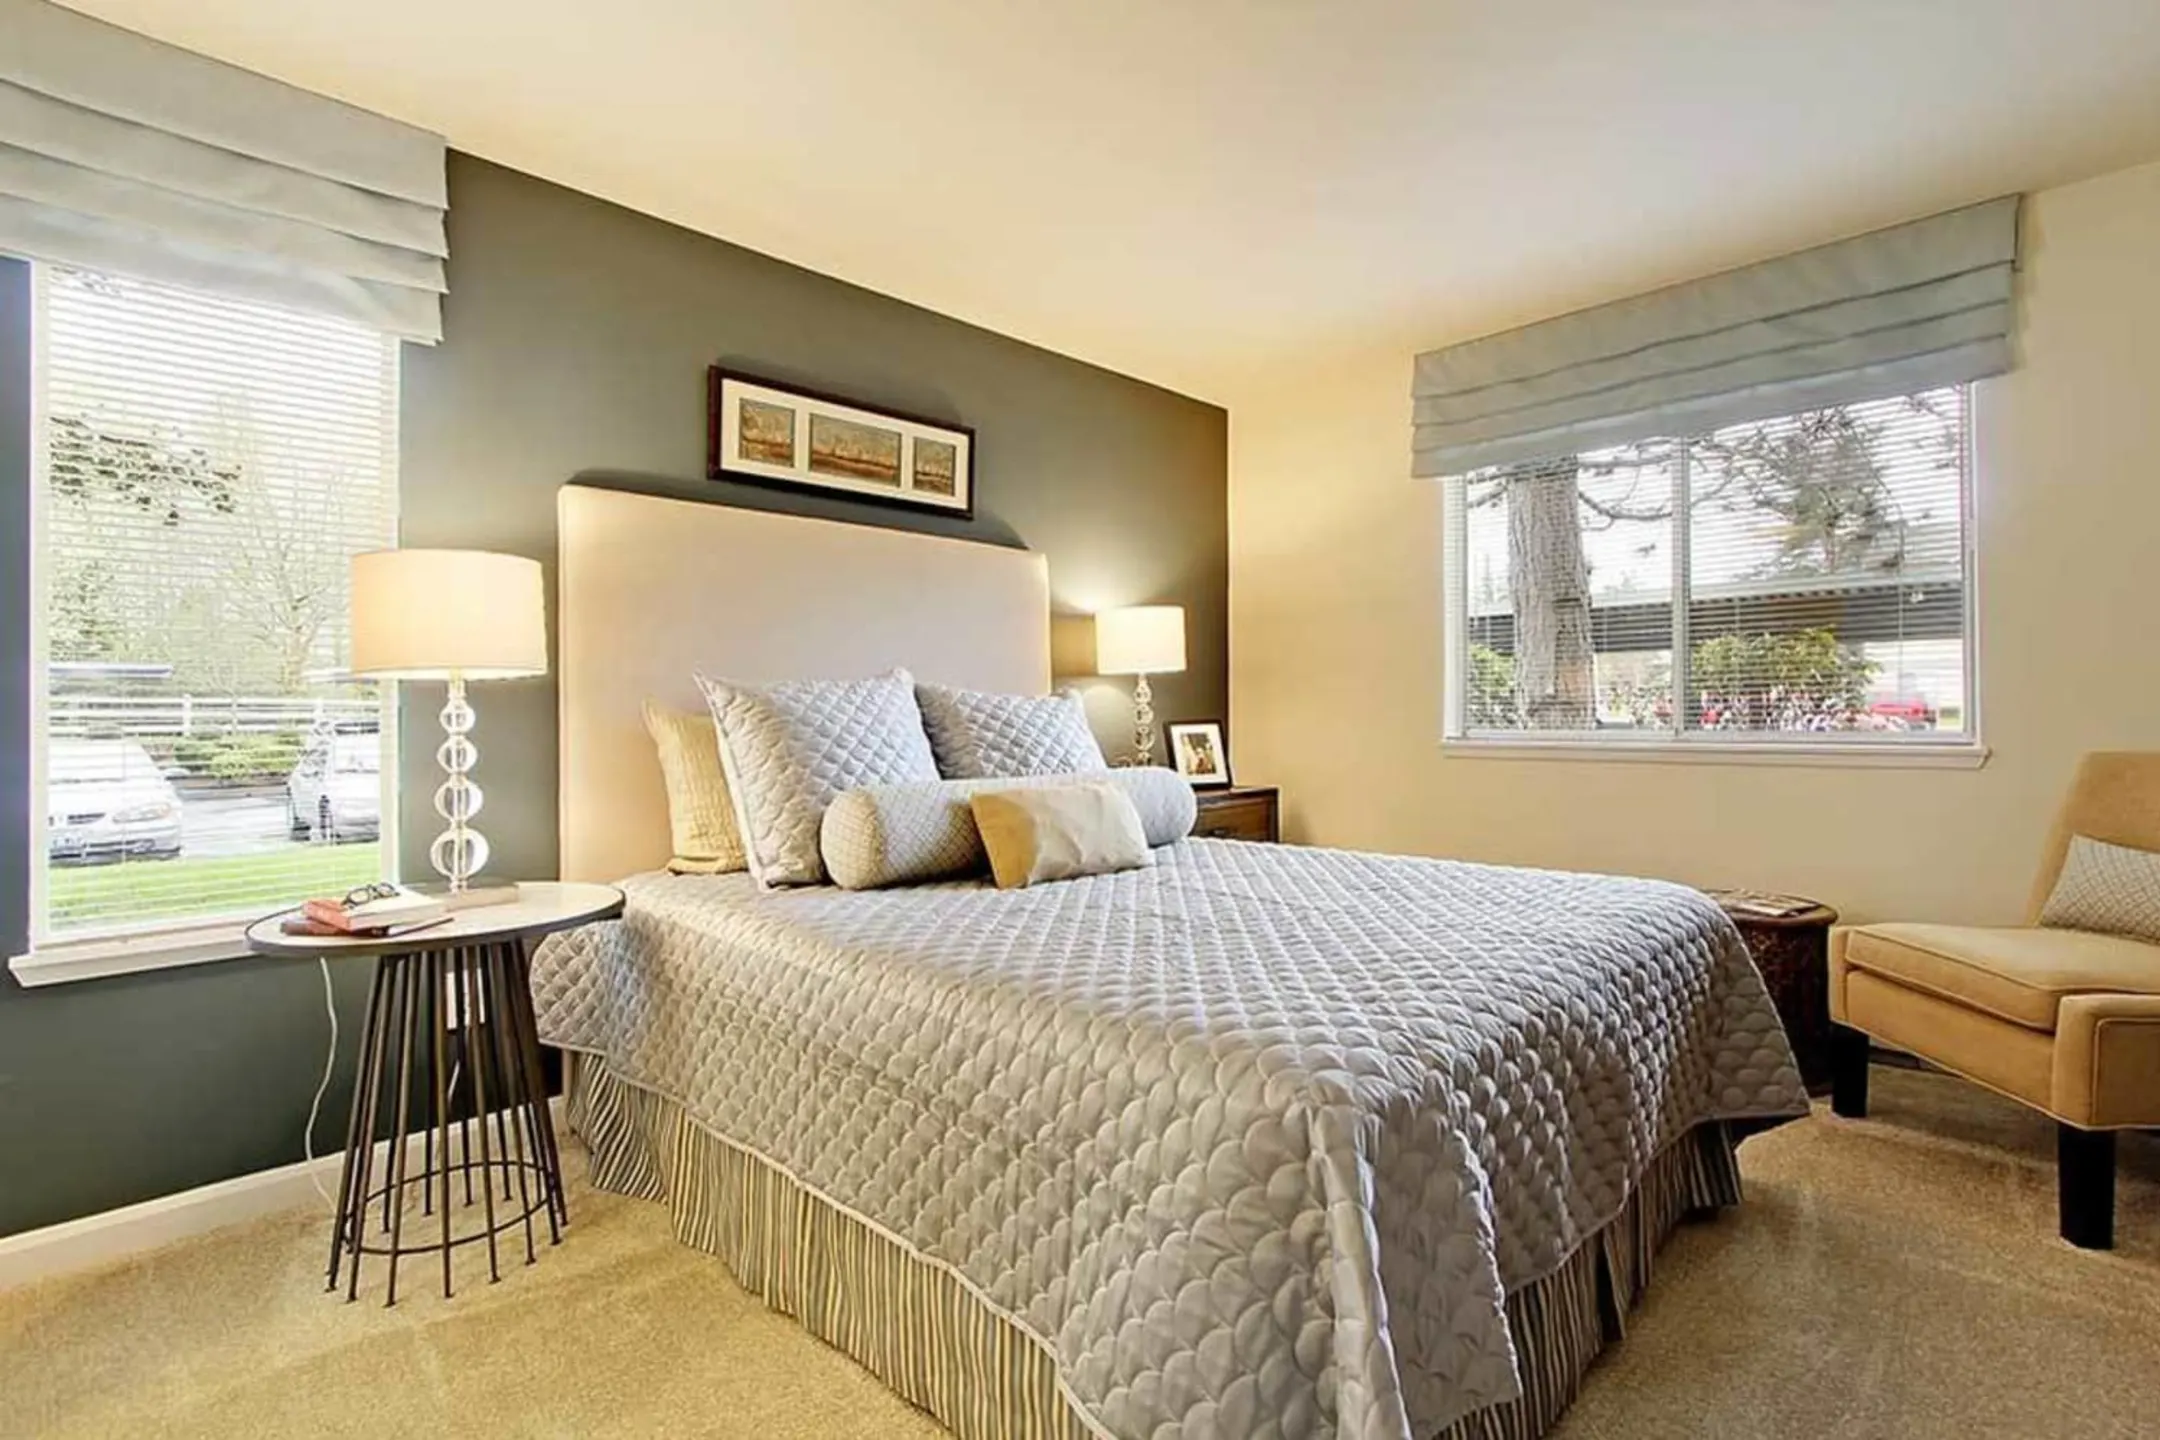 Bedroom - Campbell Run - Woodinville, WA